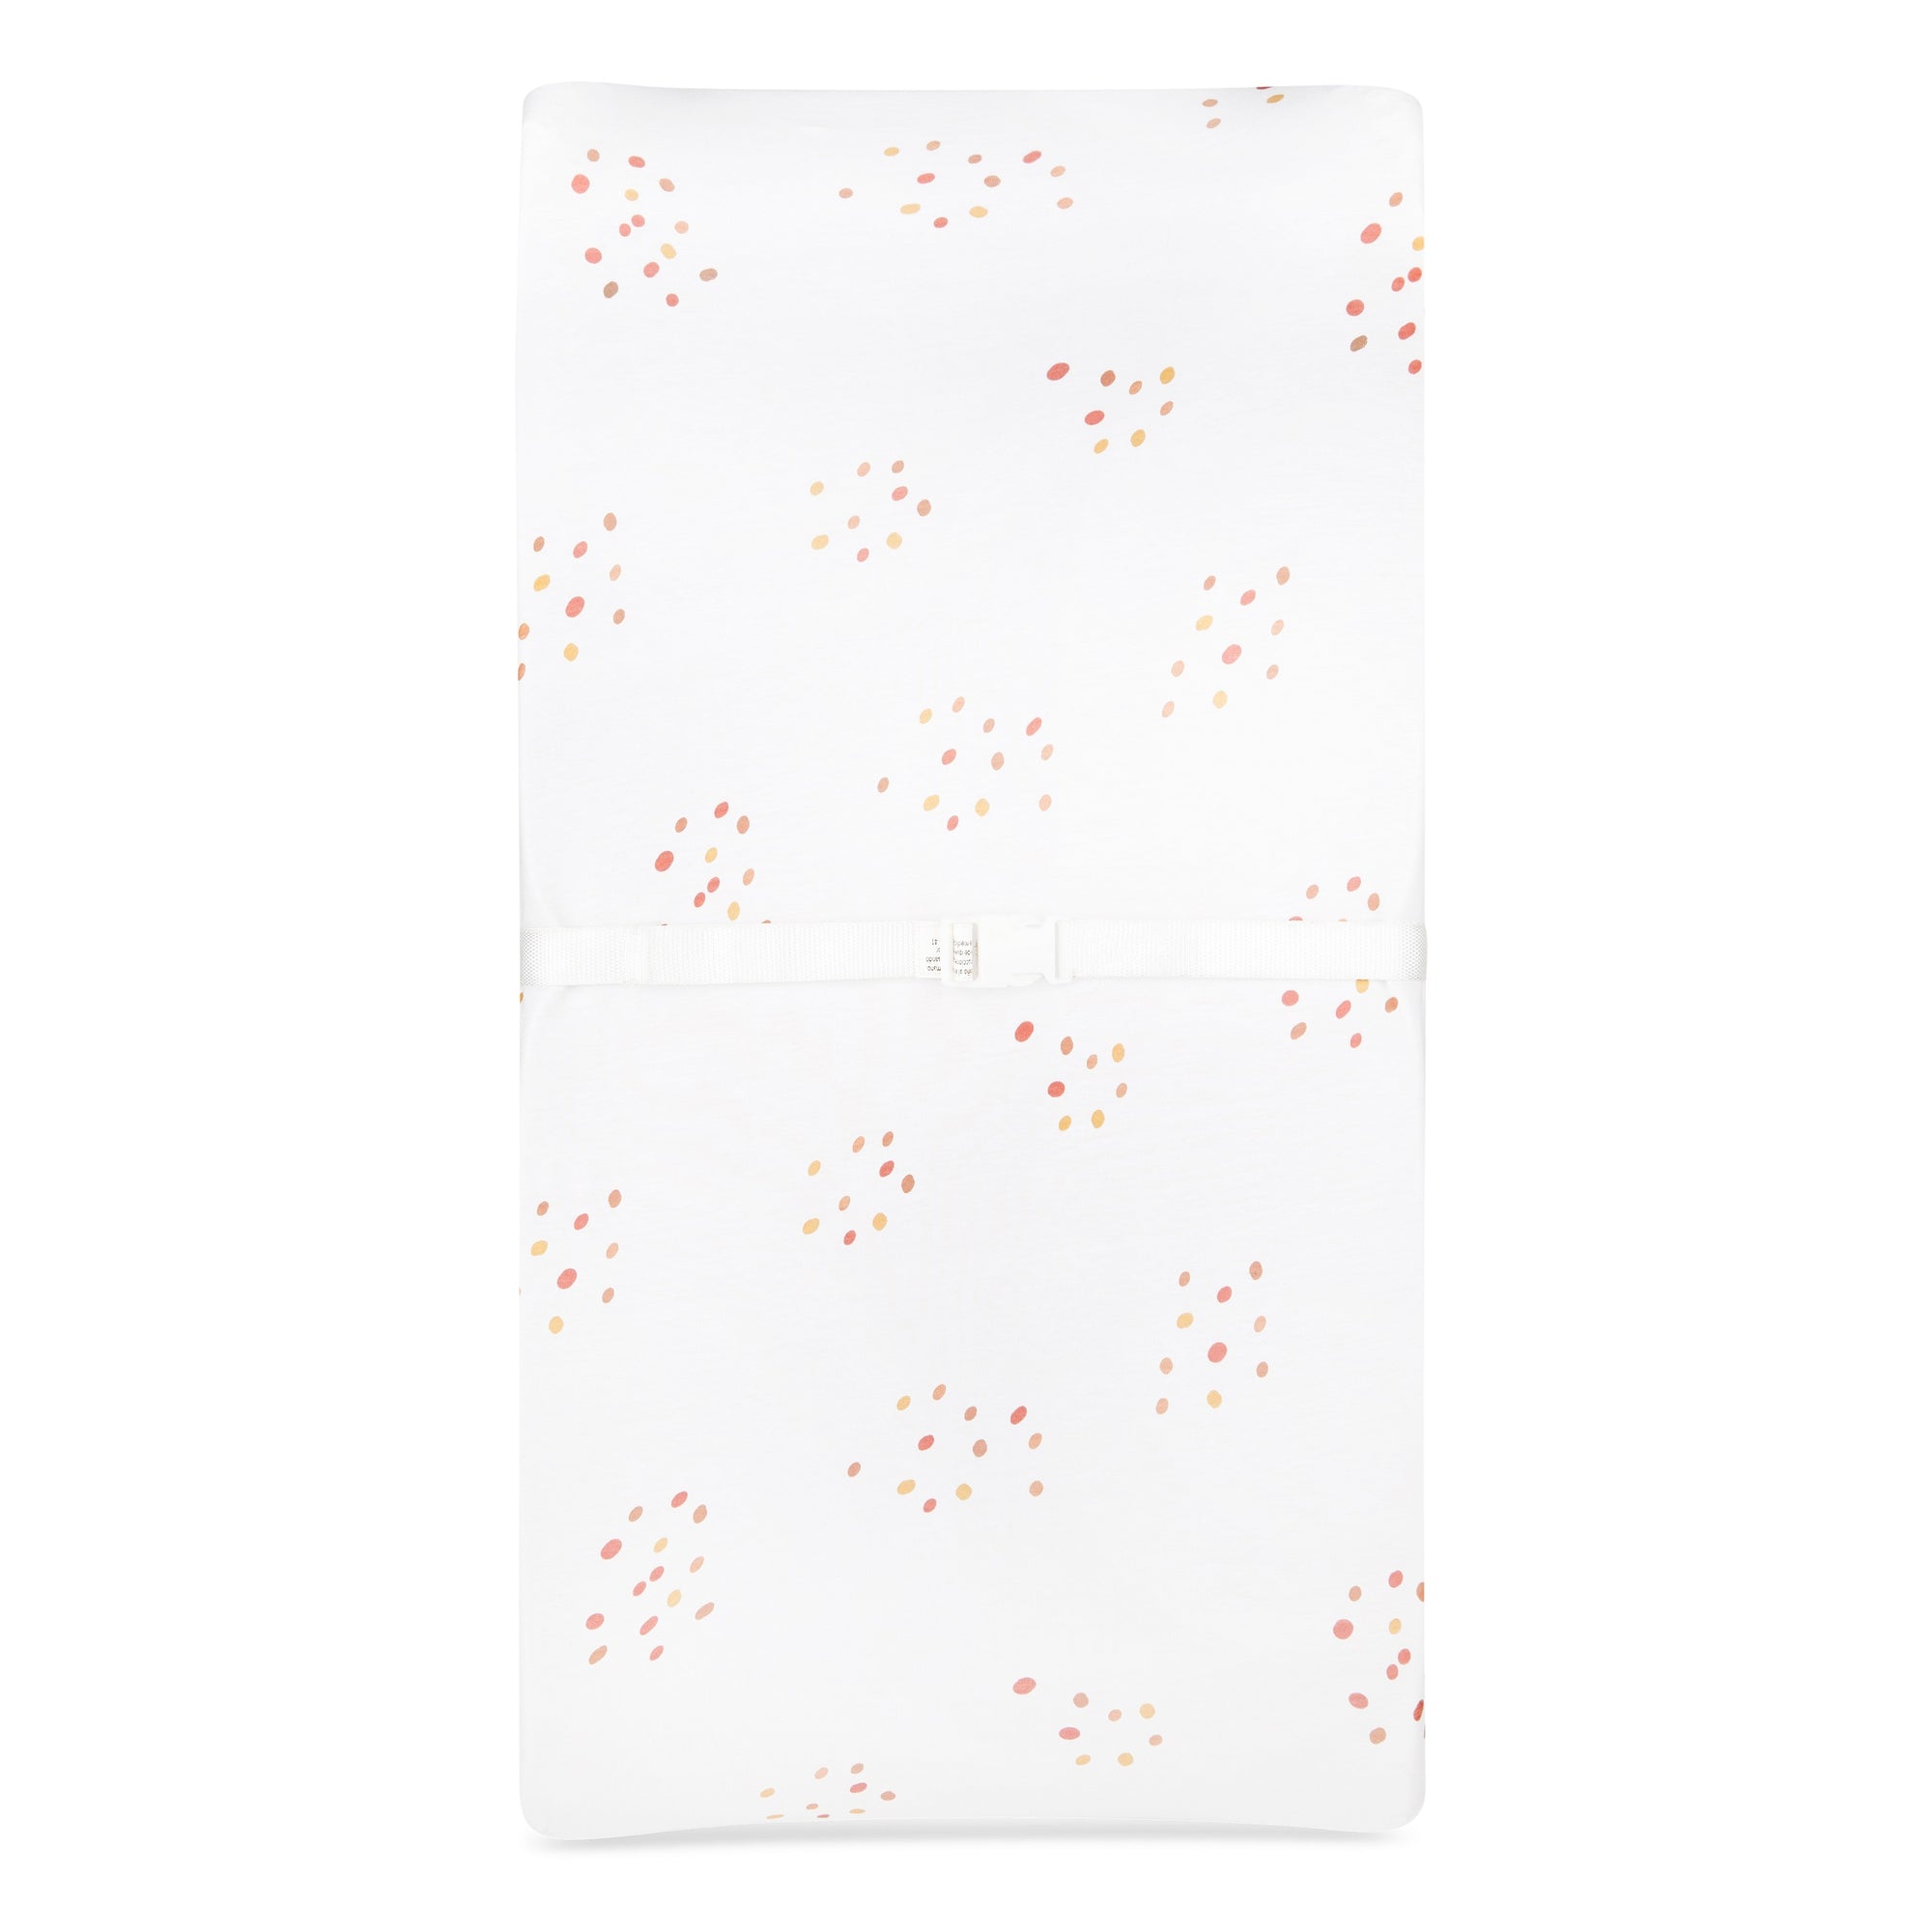 Changing Pad Cover  | Cradle Sheet